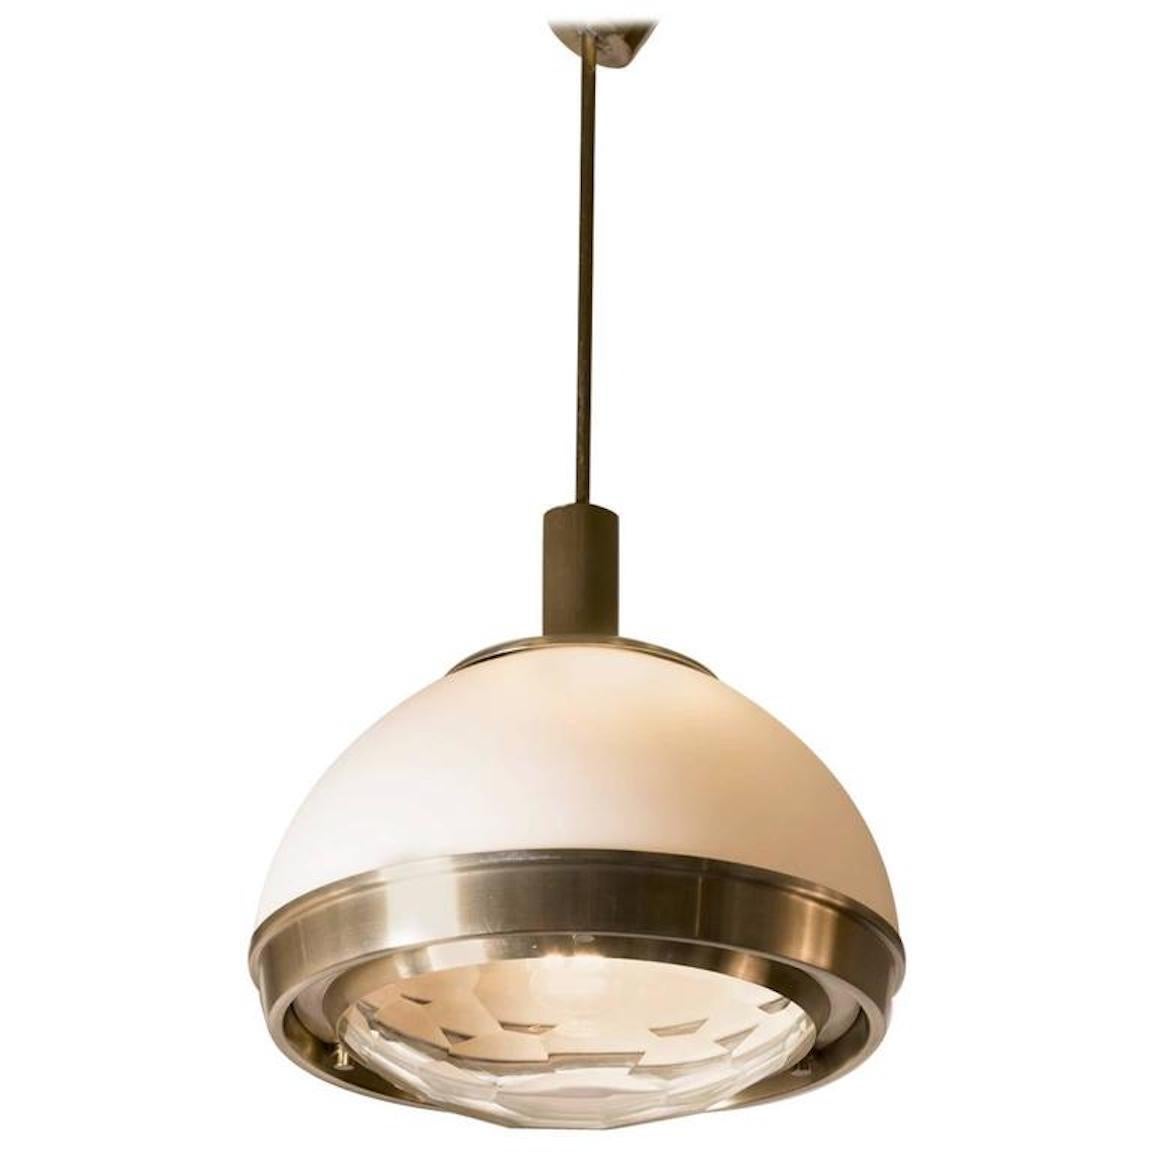 Italian milk, faceted glass and chrome pendant light by Pia Guidette Crippa for Lumi, Italy. Pendant is in pristine condition and has been rewired for the United States. Dimensions are for the body only.